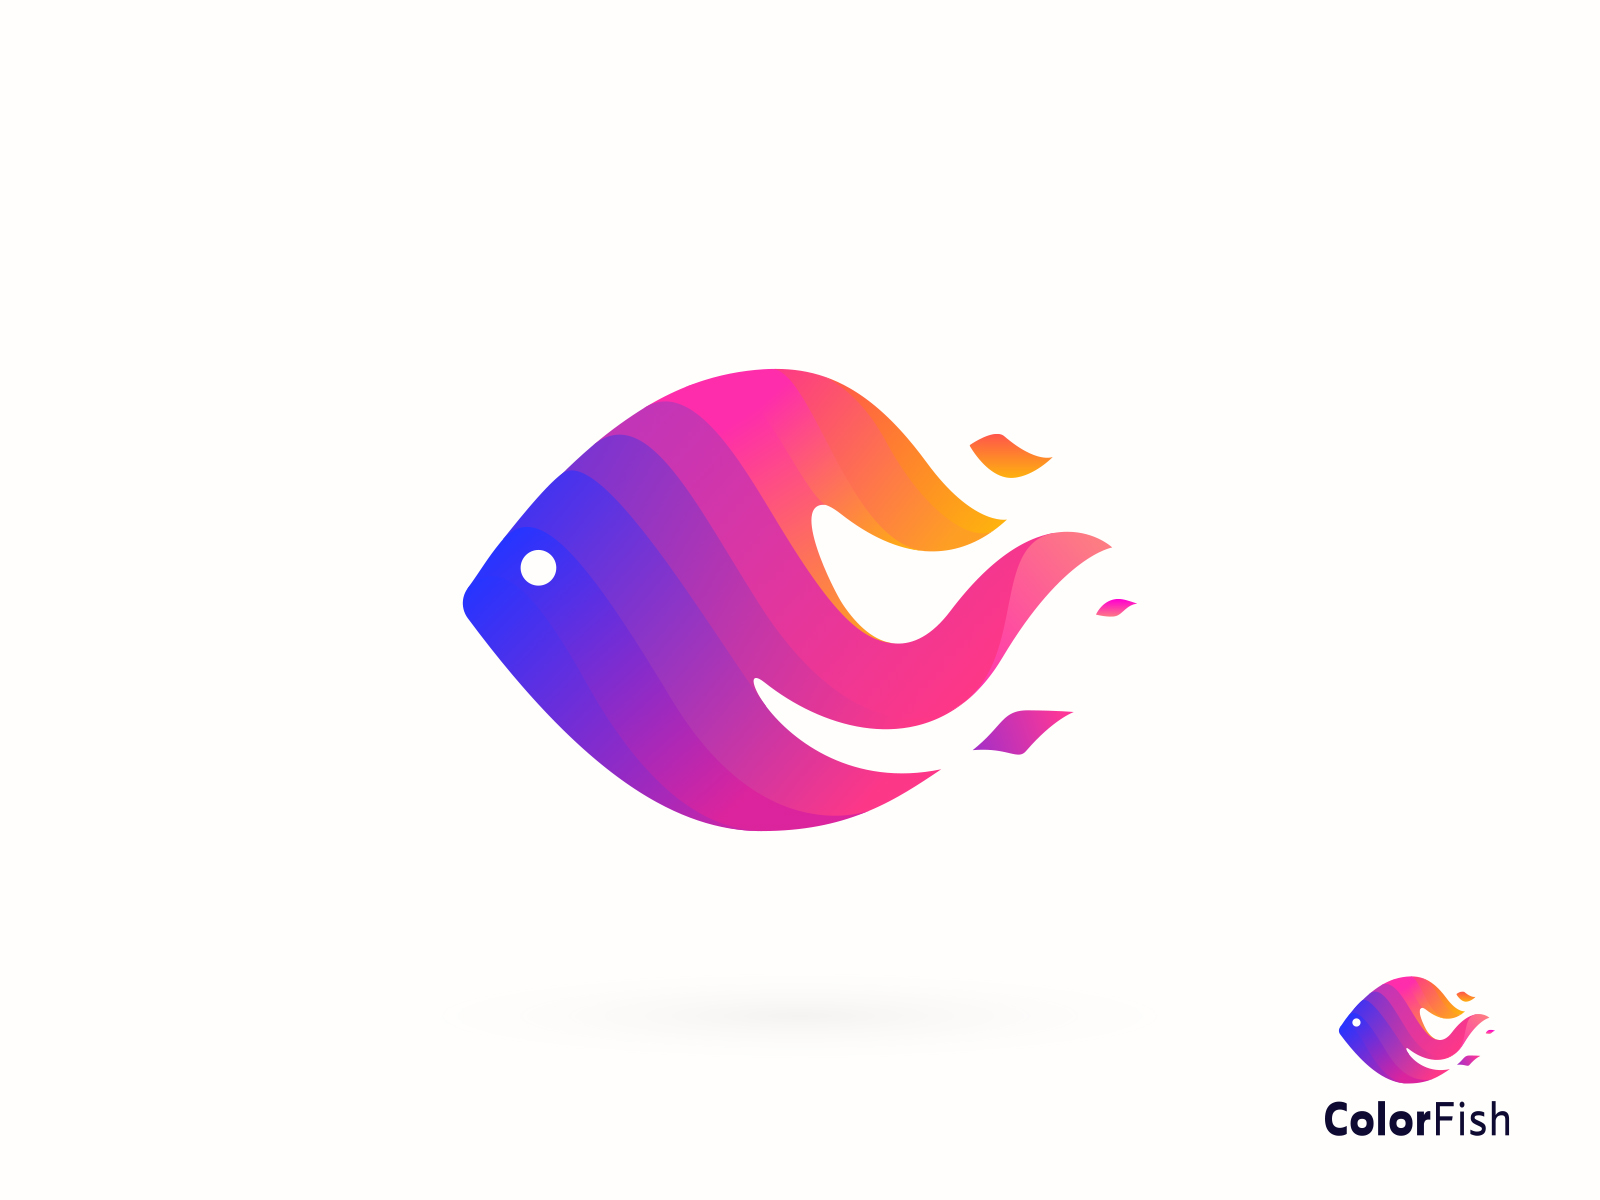 ColorFish Logo logo design by logo designer Nazztudio for your inspiration and for the worlds largest logo competition